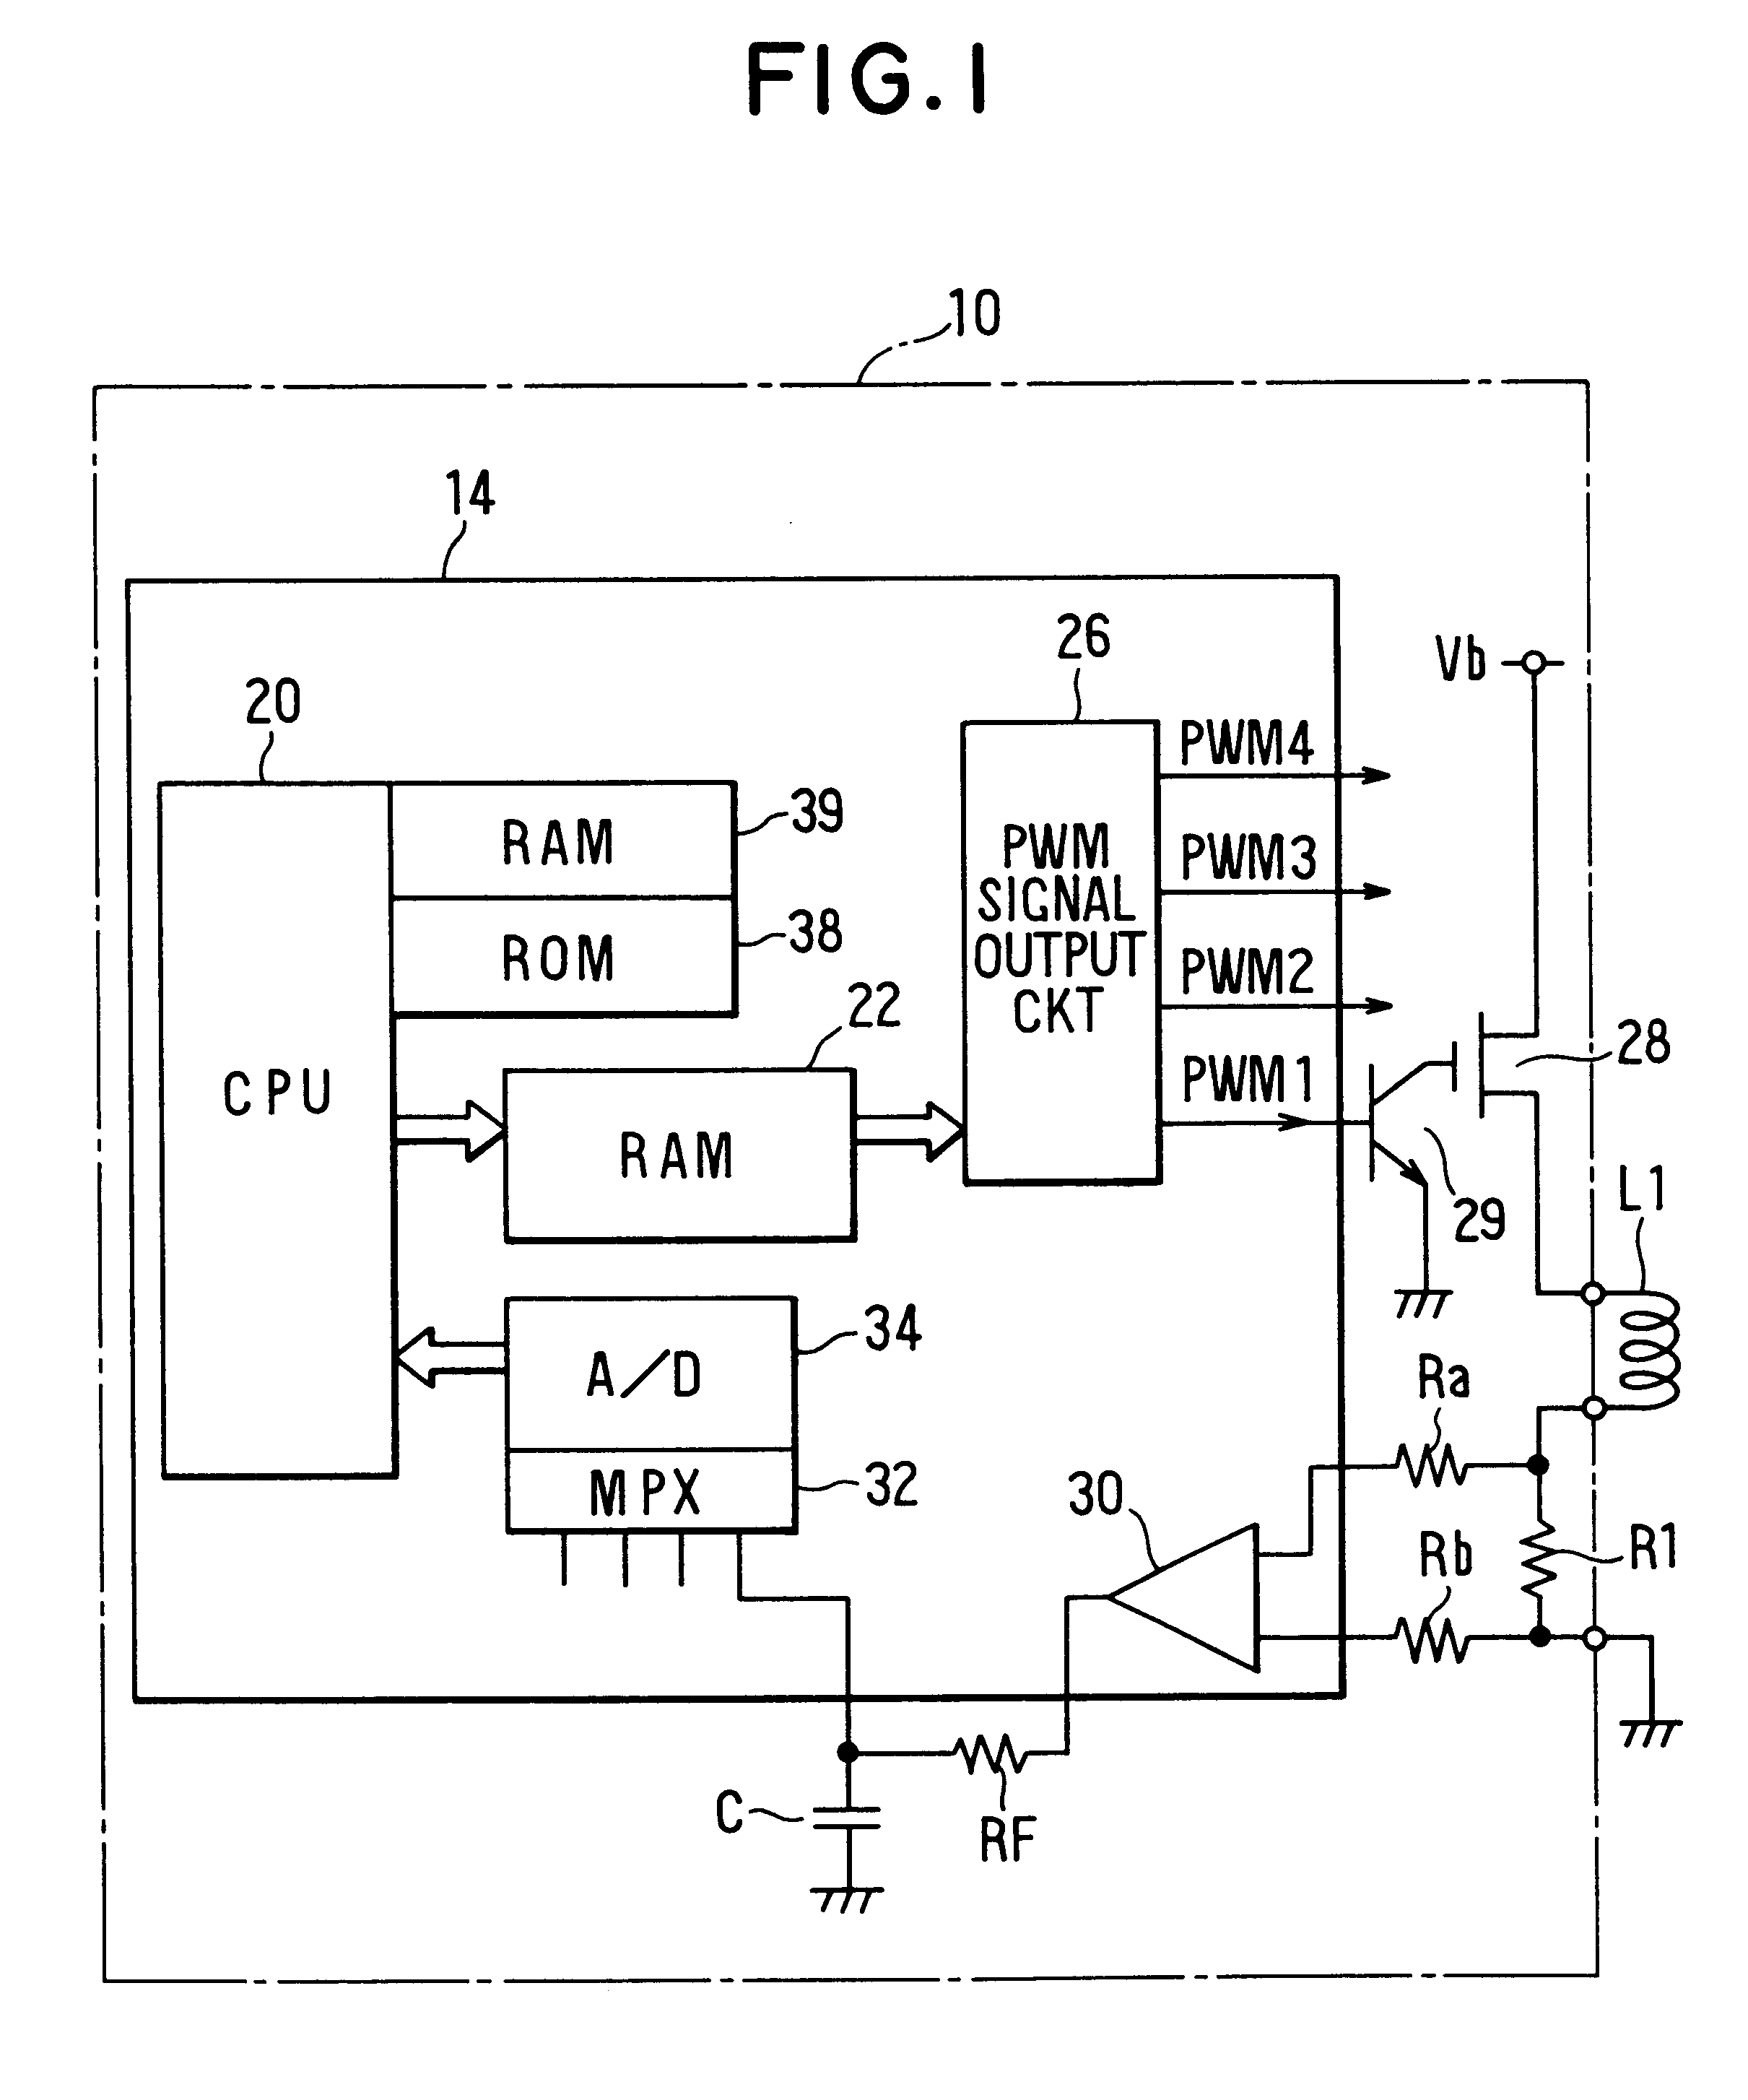 Linear solenoid control apparatus and method having increased responsiveness features